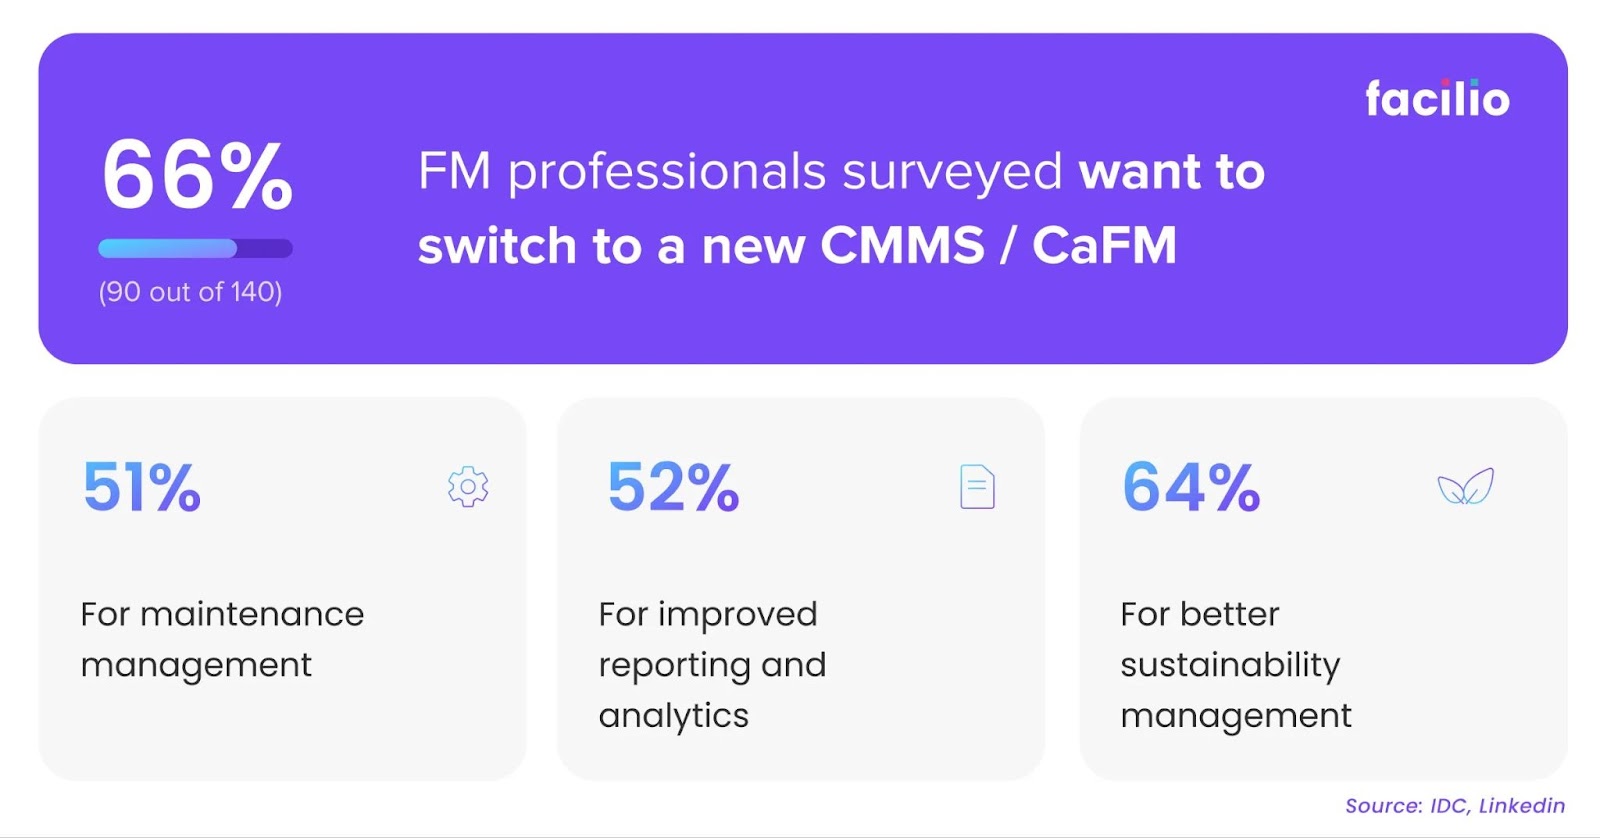 Infographic illustrating user dissatisfaction with legacy CMMS systems